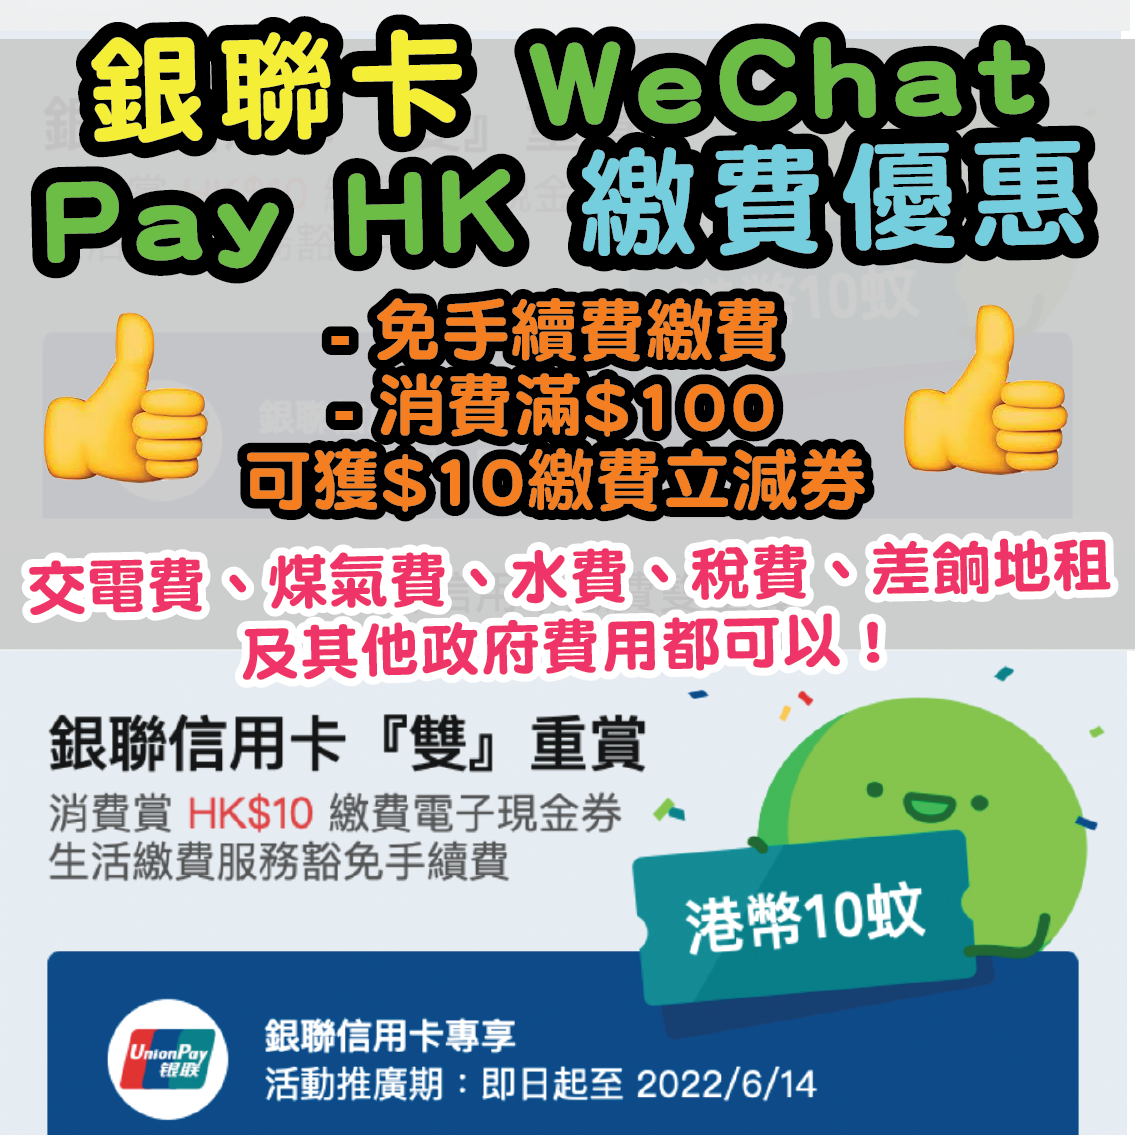 Union Pay Wechat-03